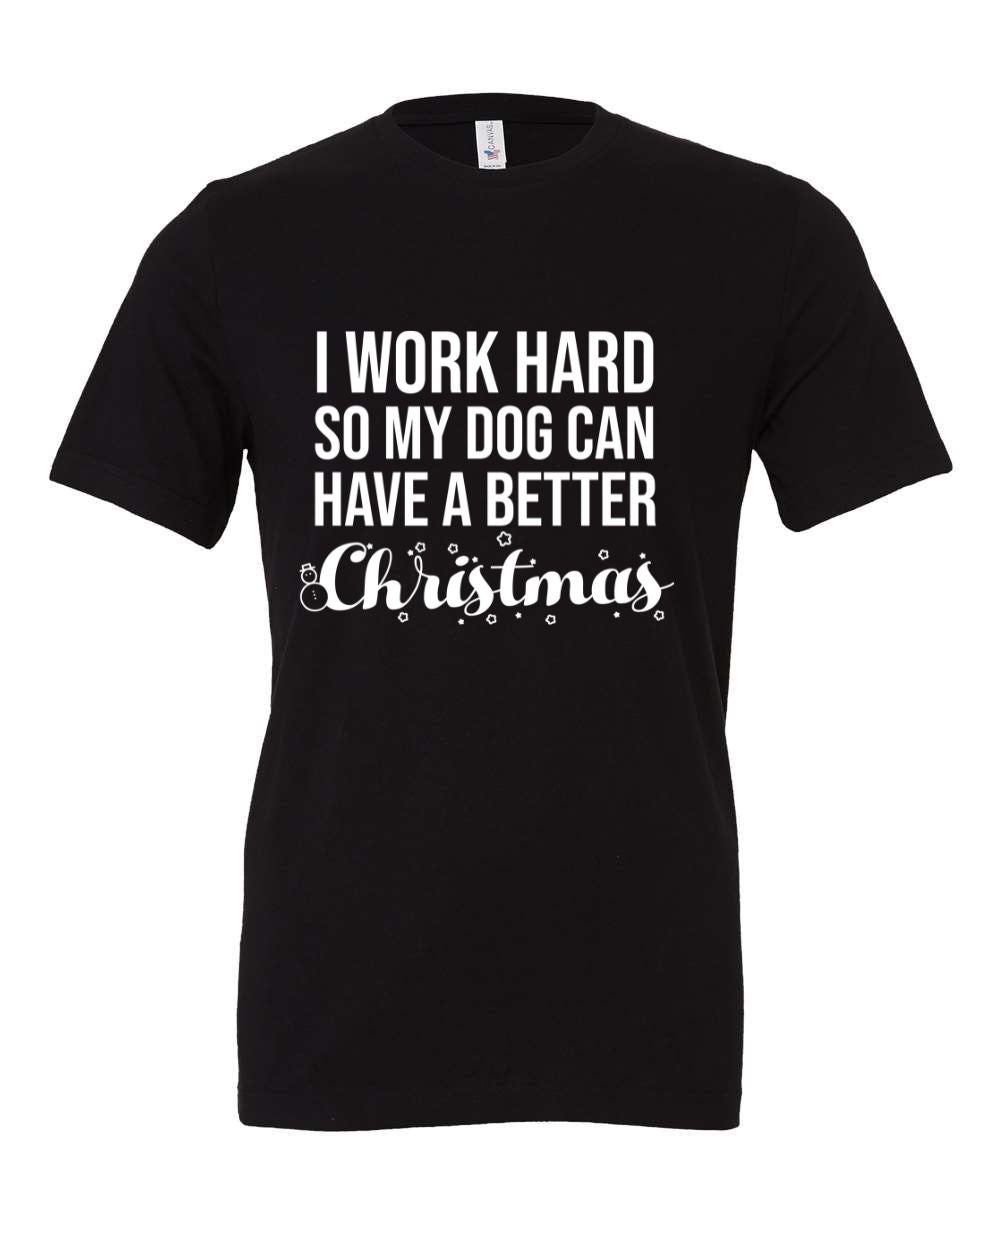 I Work Hard So My Dog Can Have A Better Christmas T-Shirt